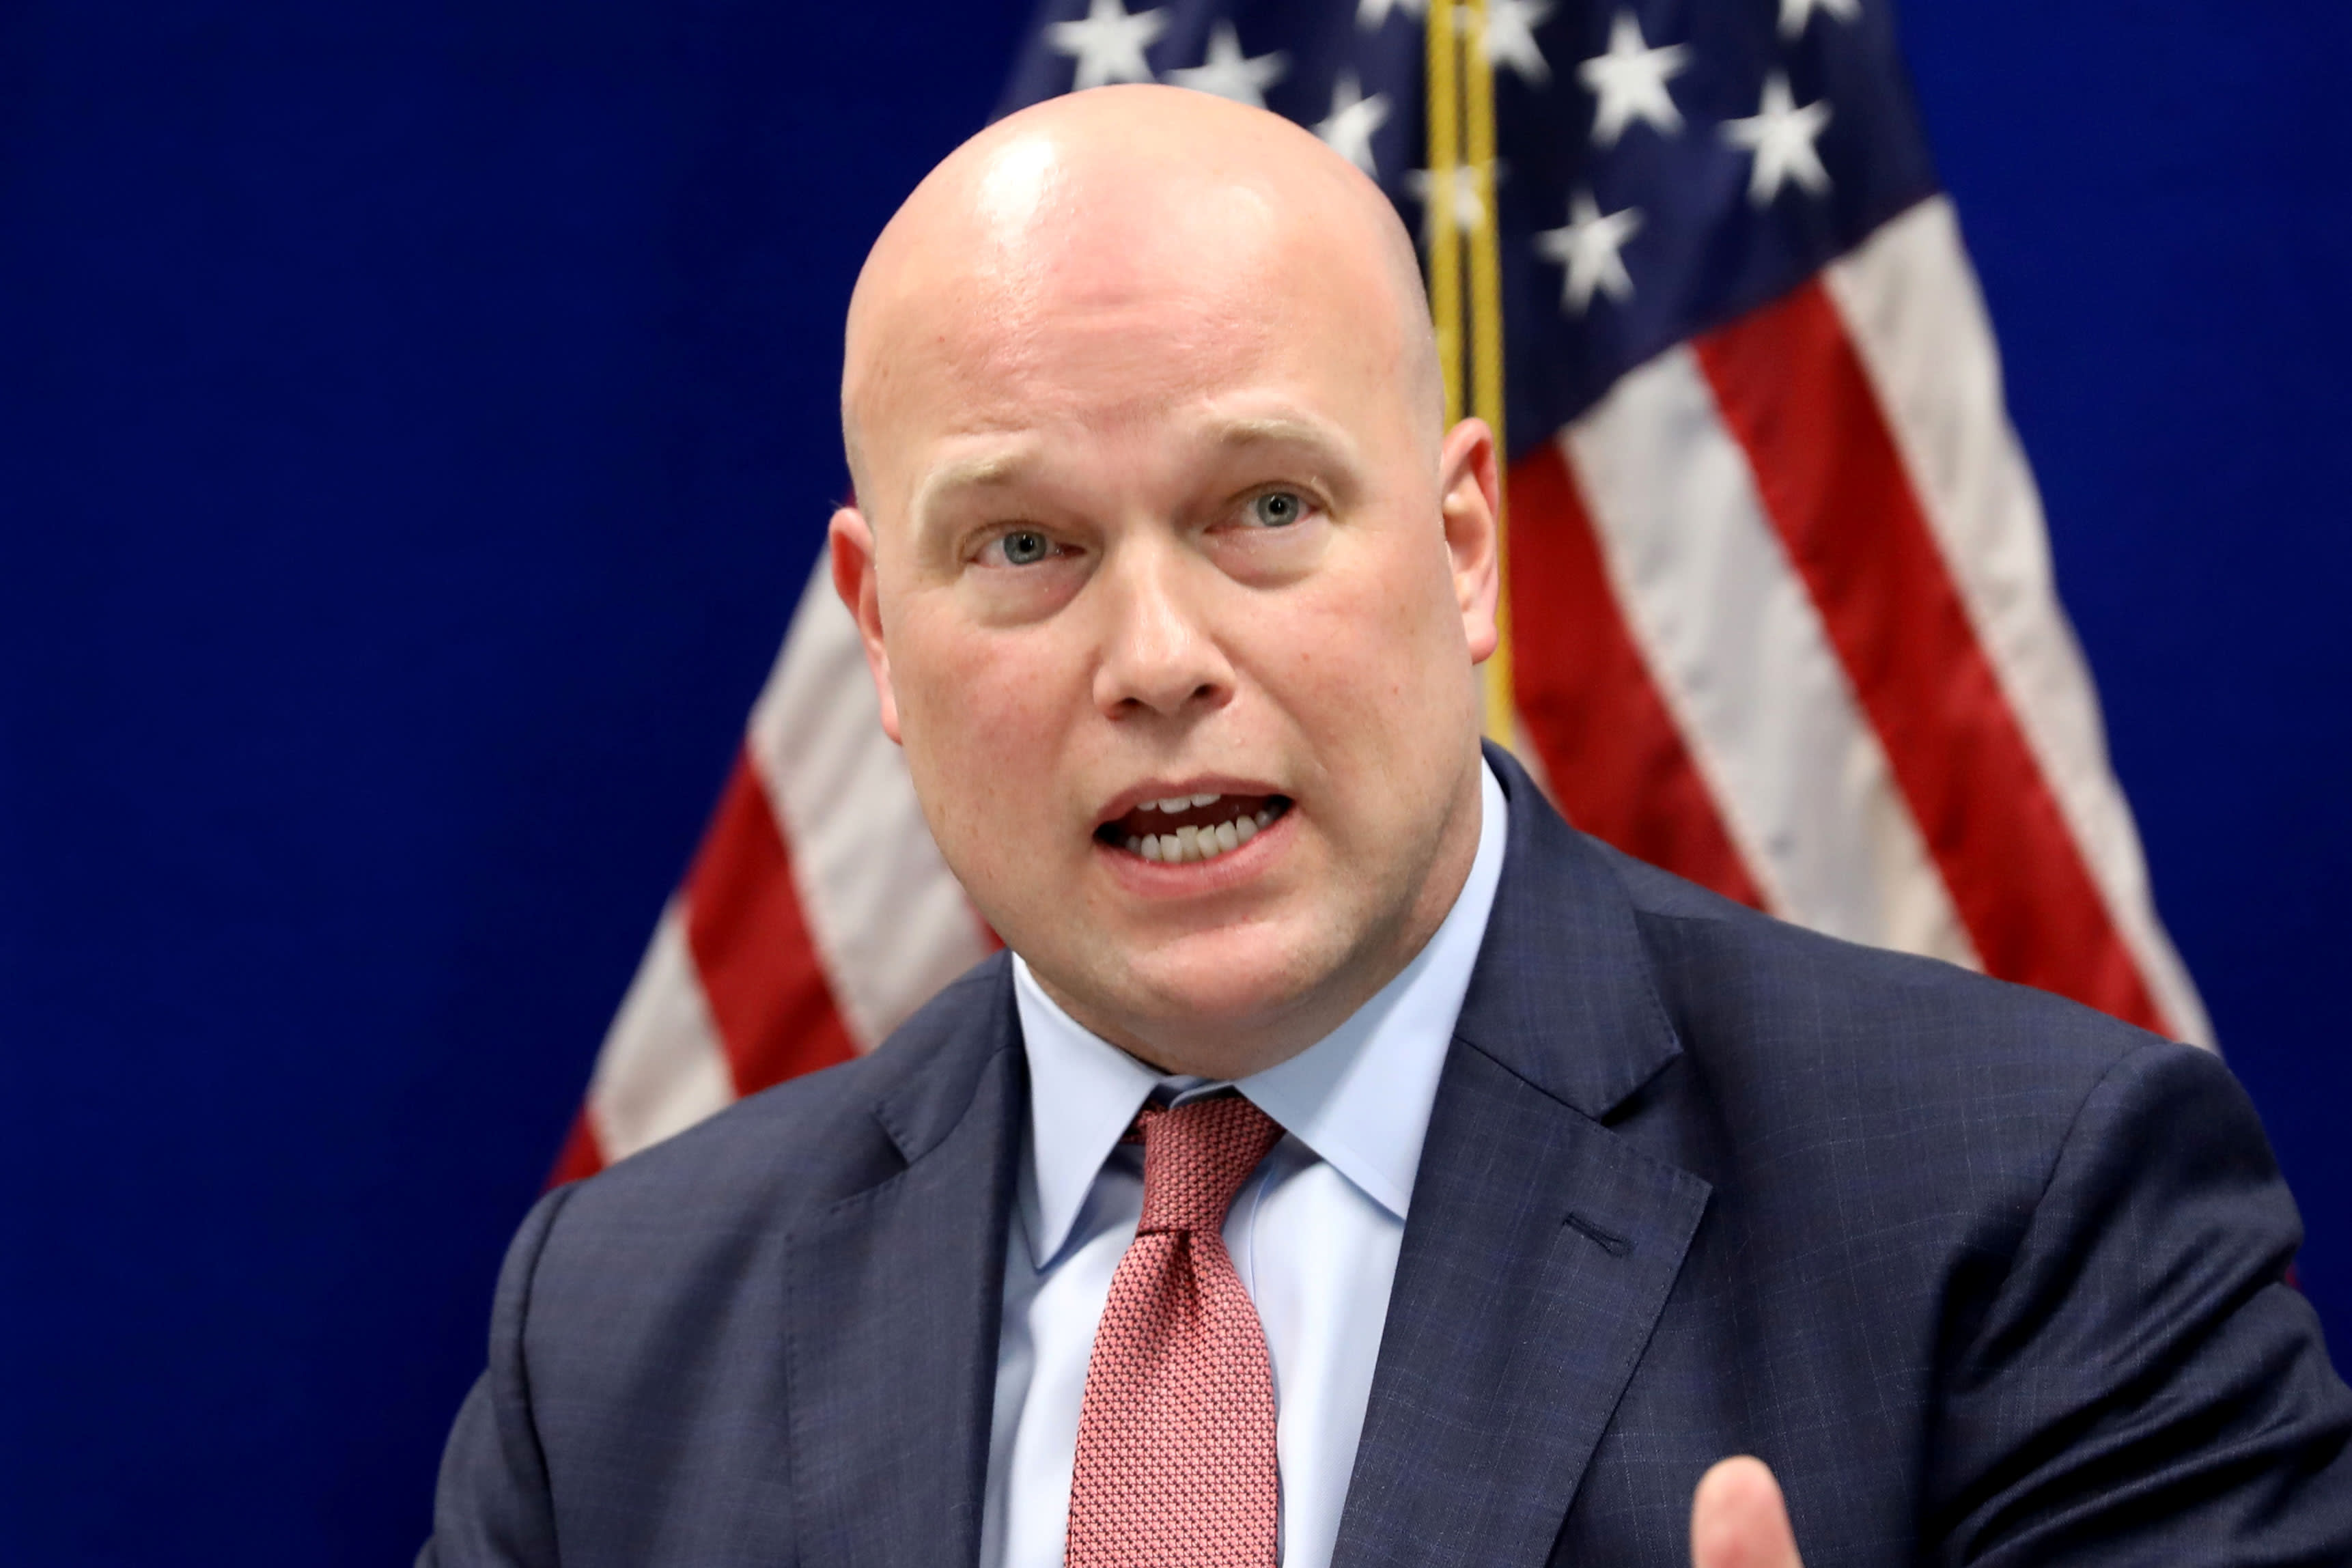 Acting AG Whitaker reportedly doesn't have to recuse himself from ...